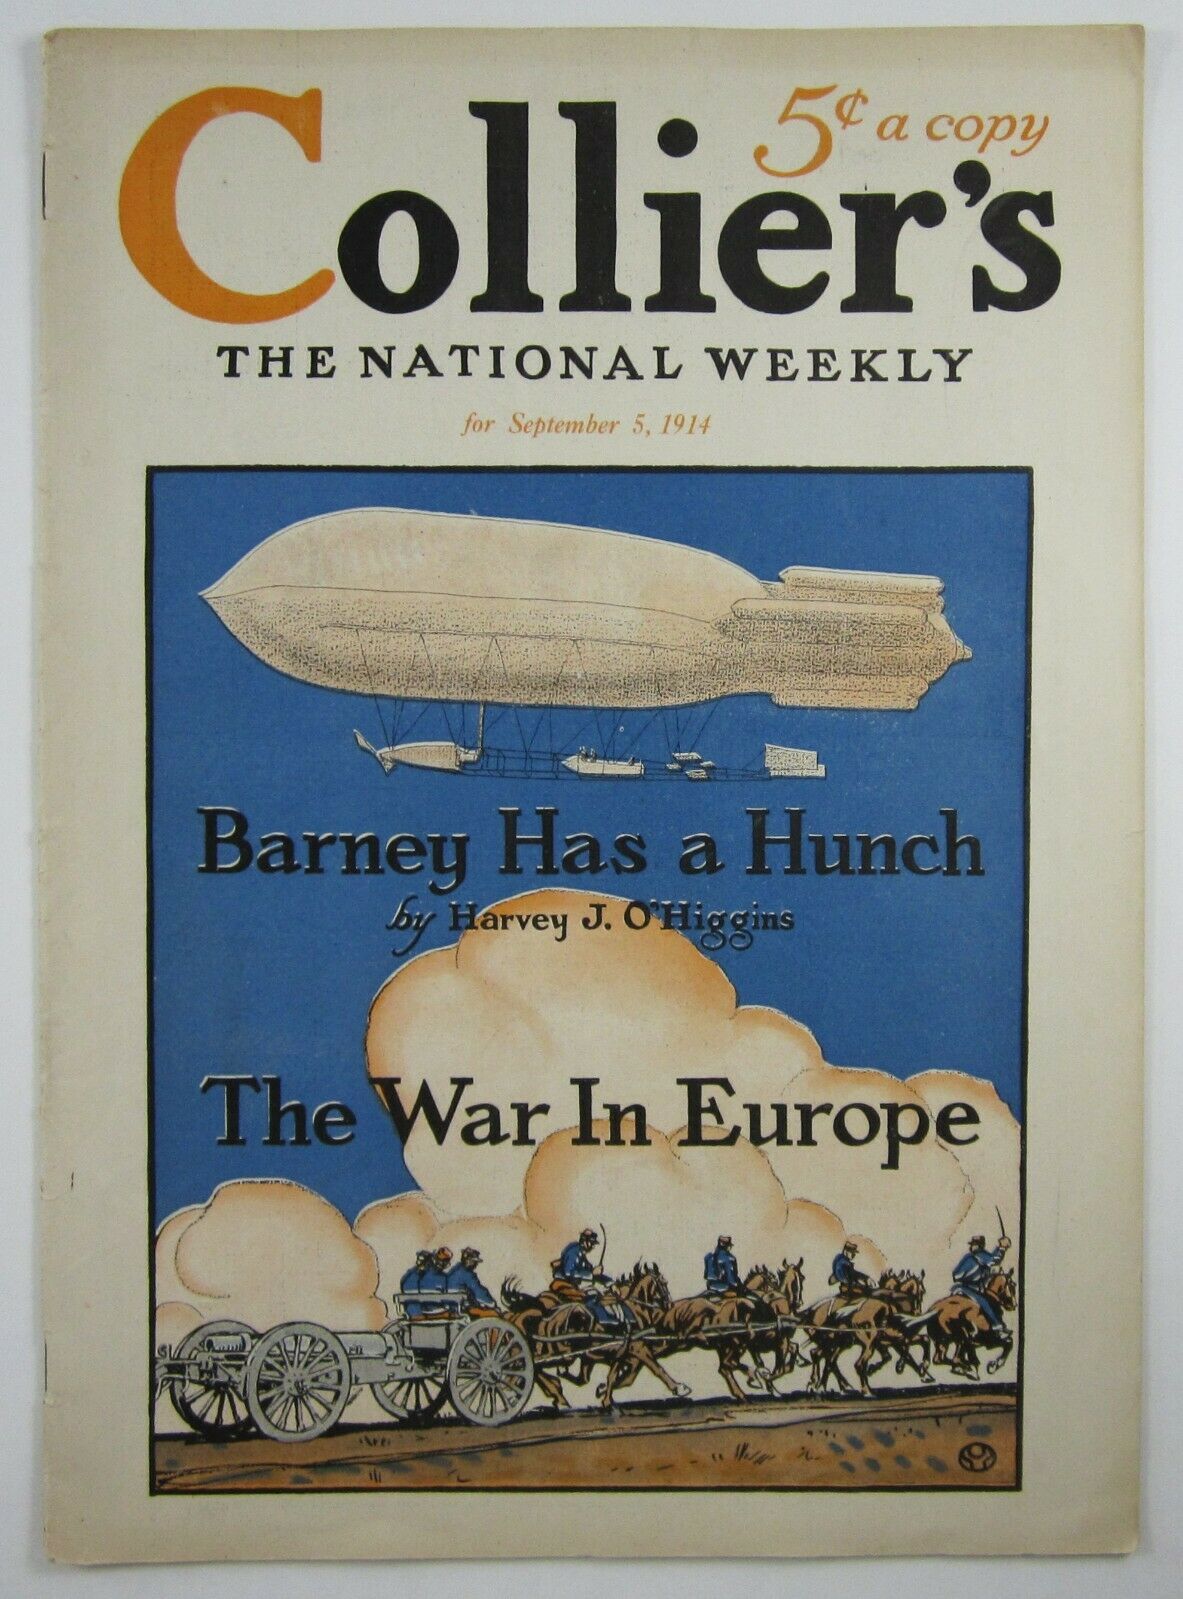 Wwi Dirigible Airship Colliers Magazine Early Days Great War September 5, 1914